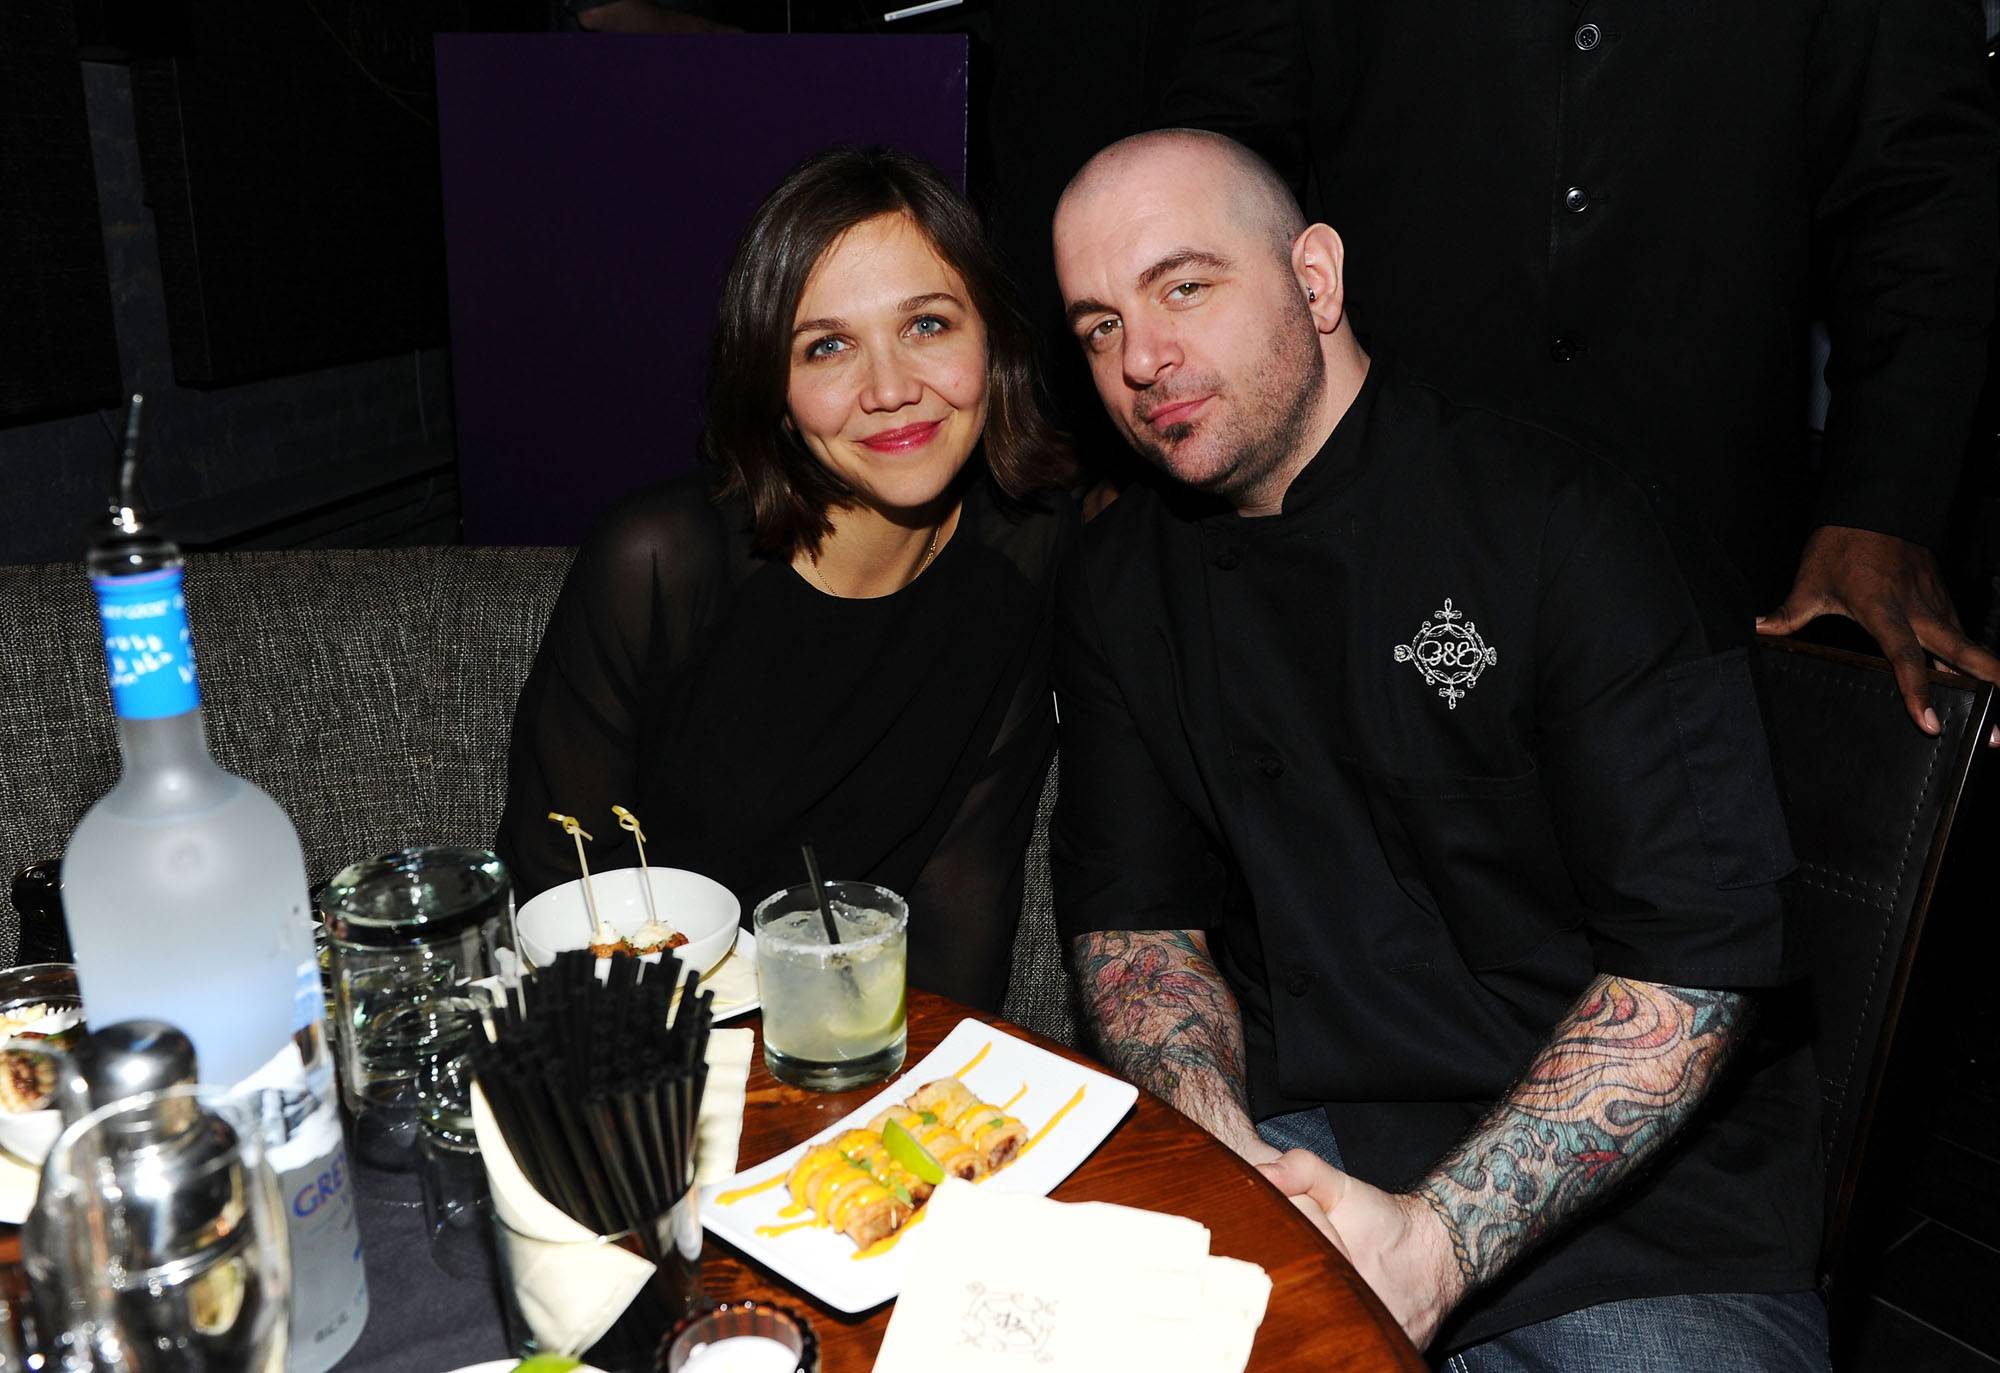 Maggie Gyllenhaal with Chris Santos at Beauty & Essex[9][2]